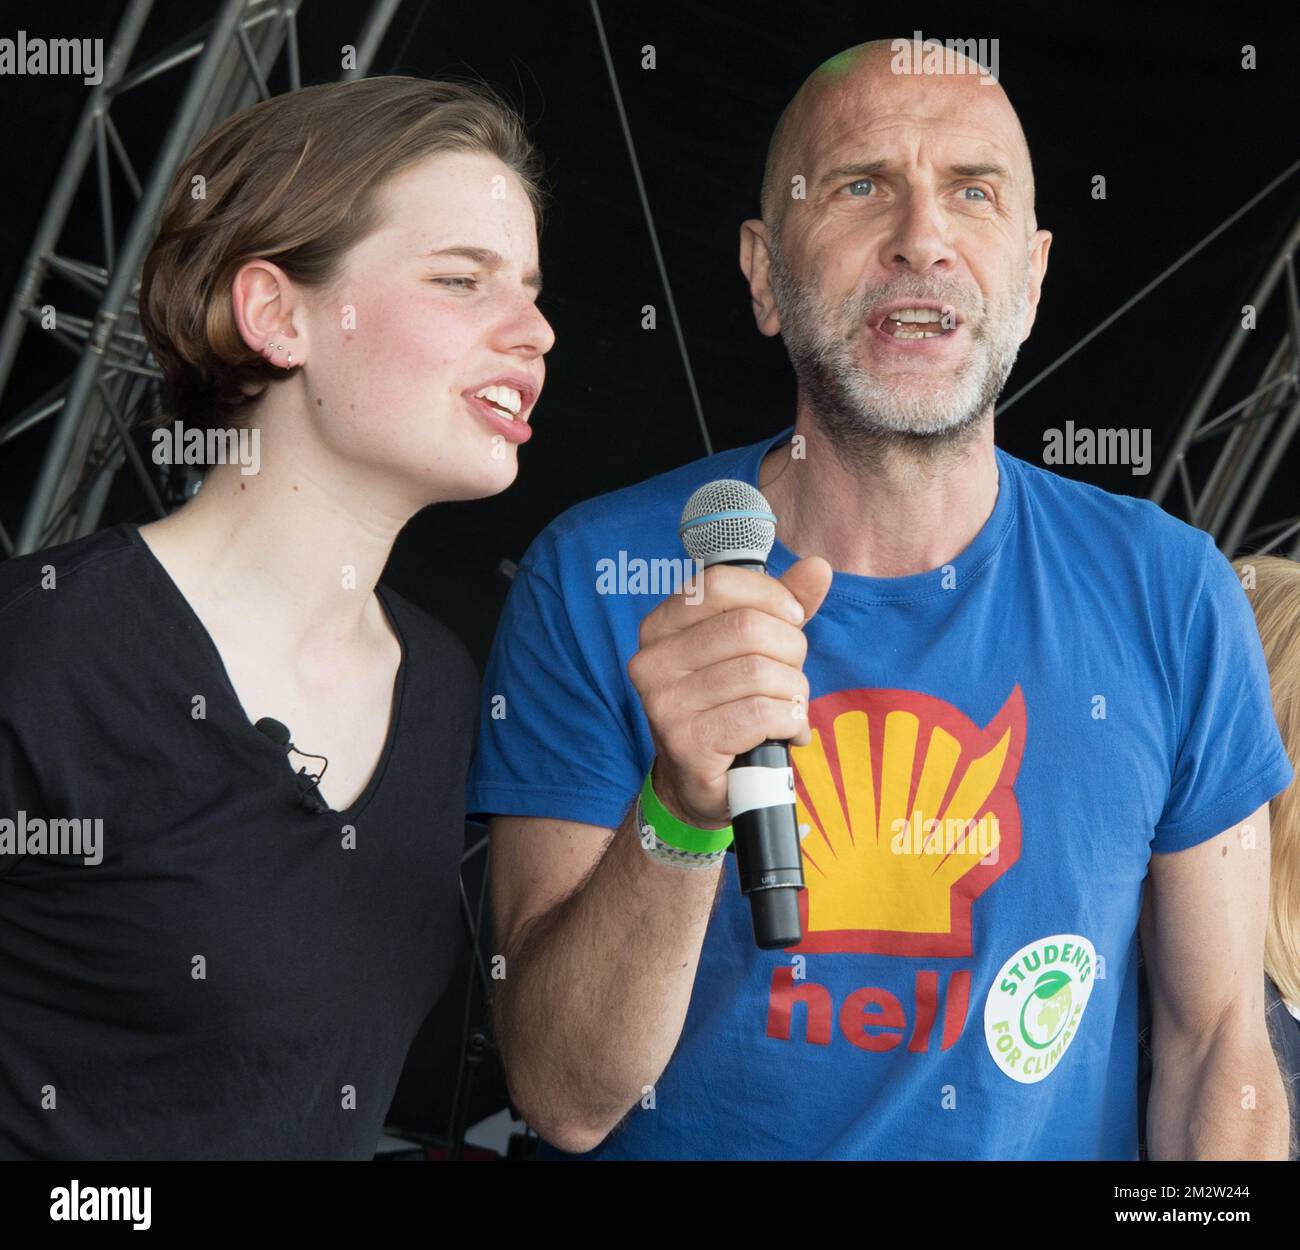 Climate activist Anuna De Wever and director Nic Balthazar pictured during the second edition of the 'Global Strike for Future' protest and student strike action, organized by 'Youth For Climate', urging pupils to skip classes to protest a lack of climate awareness, Friday 24 May 2019 in Brussels. This marks the 20th consecutive week youths take the streets. The action is inspired by the 'School Strike' of Swedish 15-year-old Thunberg. BELGA PHOTO BENOIT DOPPAGNE Stock Photo